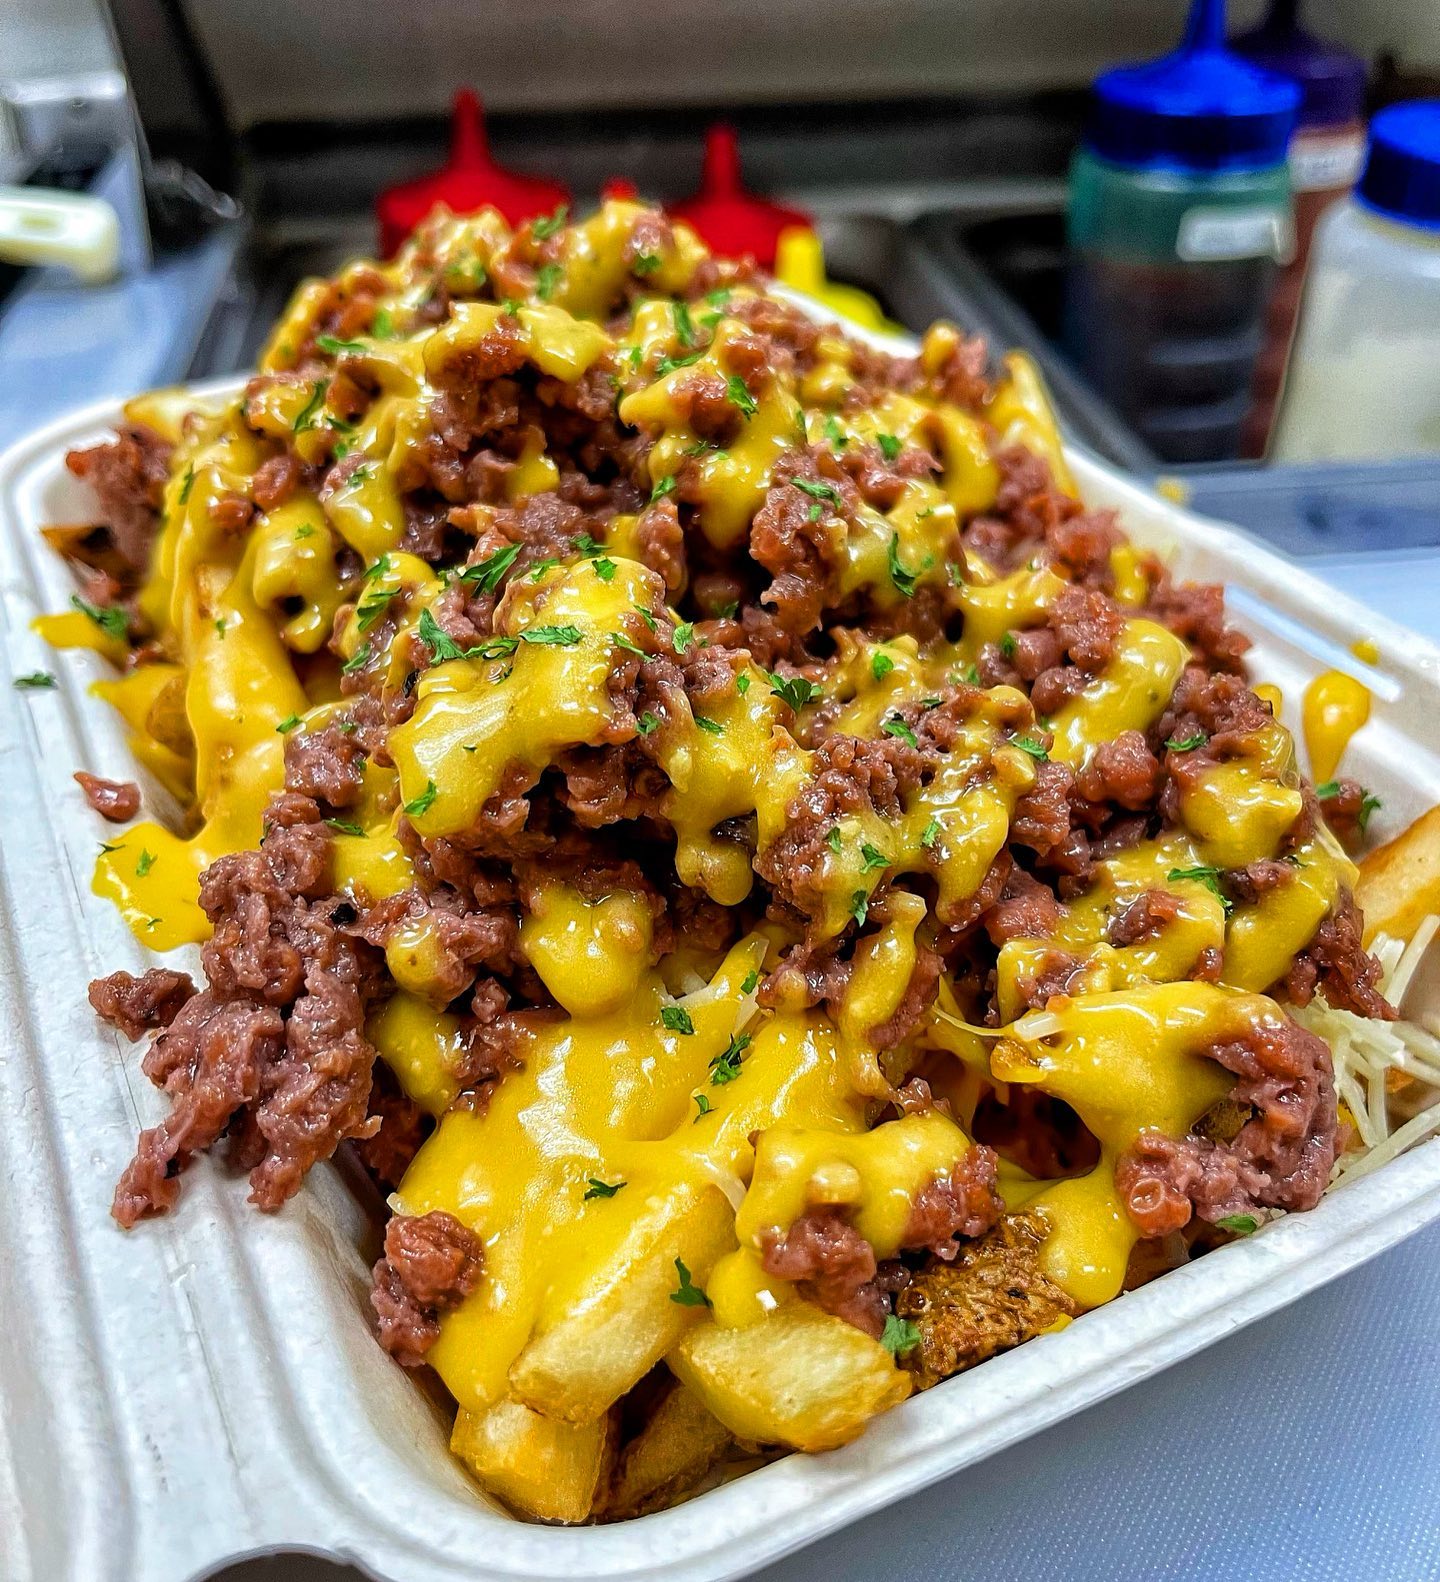 Lemon garlic Beyond Meat fries from LA-based takeout joint Mr. Fries Man, which opened its first Atlanta location in 2021 on Decatur Street downtown.